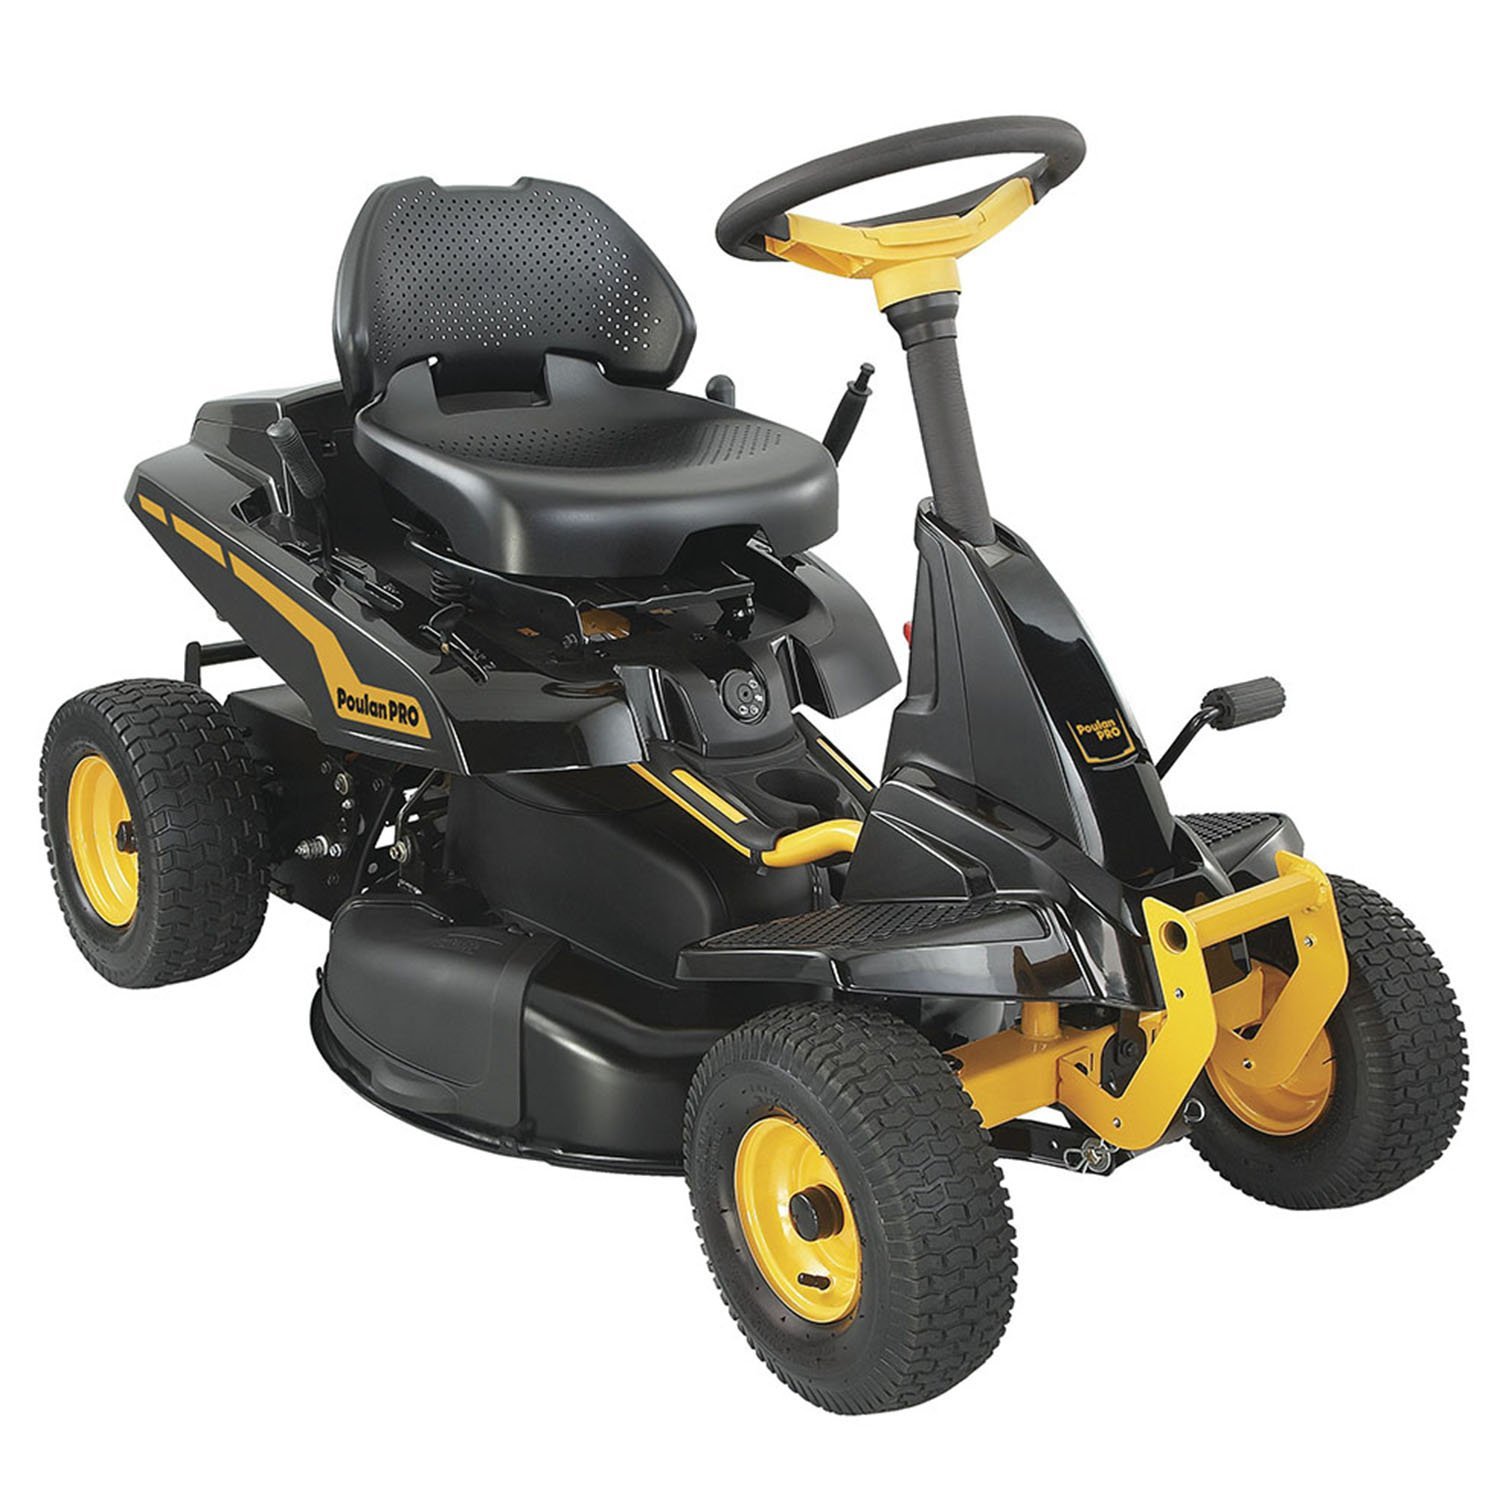 Best Small Lawn Tractor at Garden Equipment